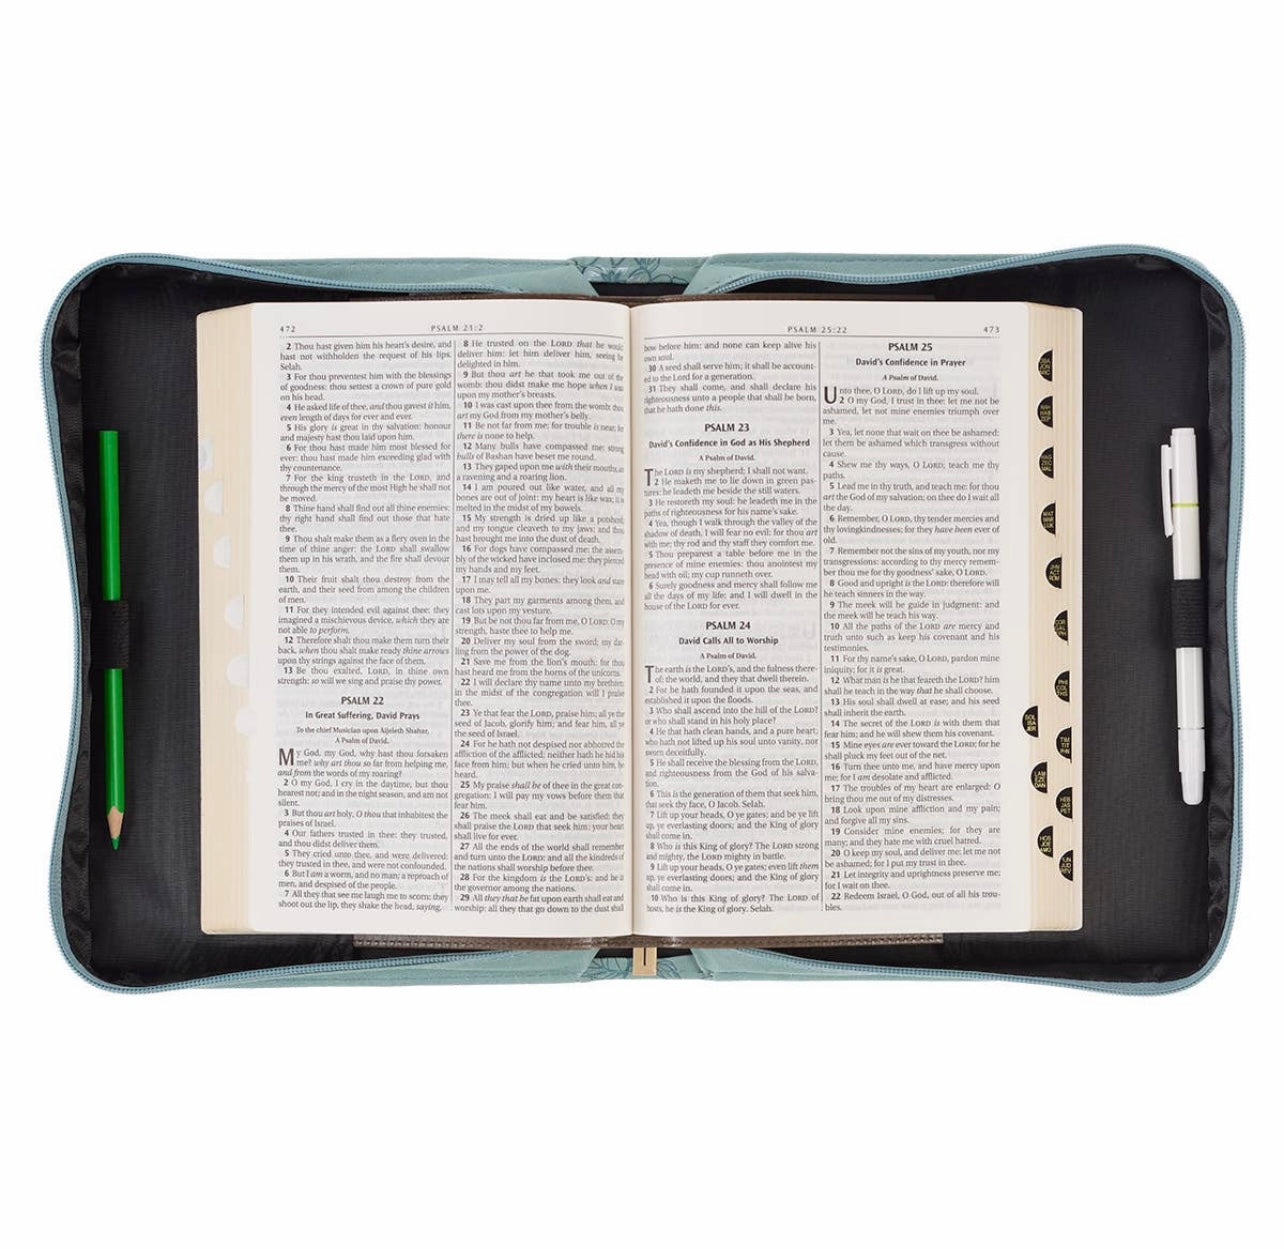 Plans to Prosper Bible Cover